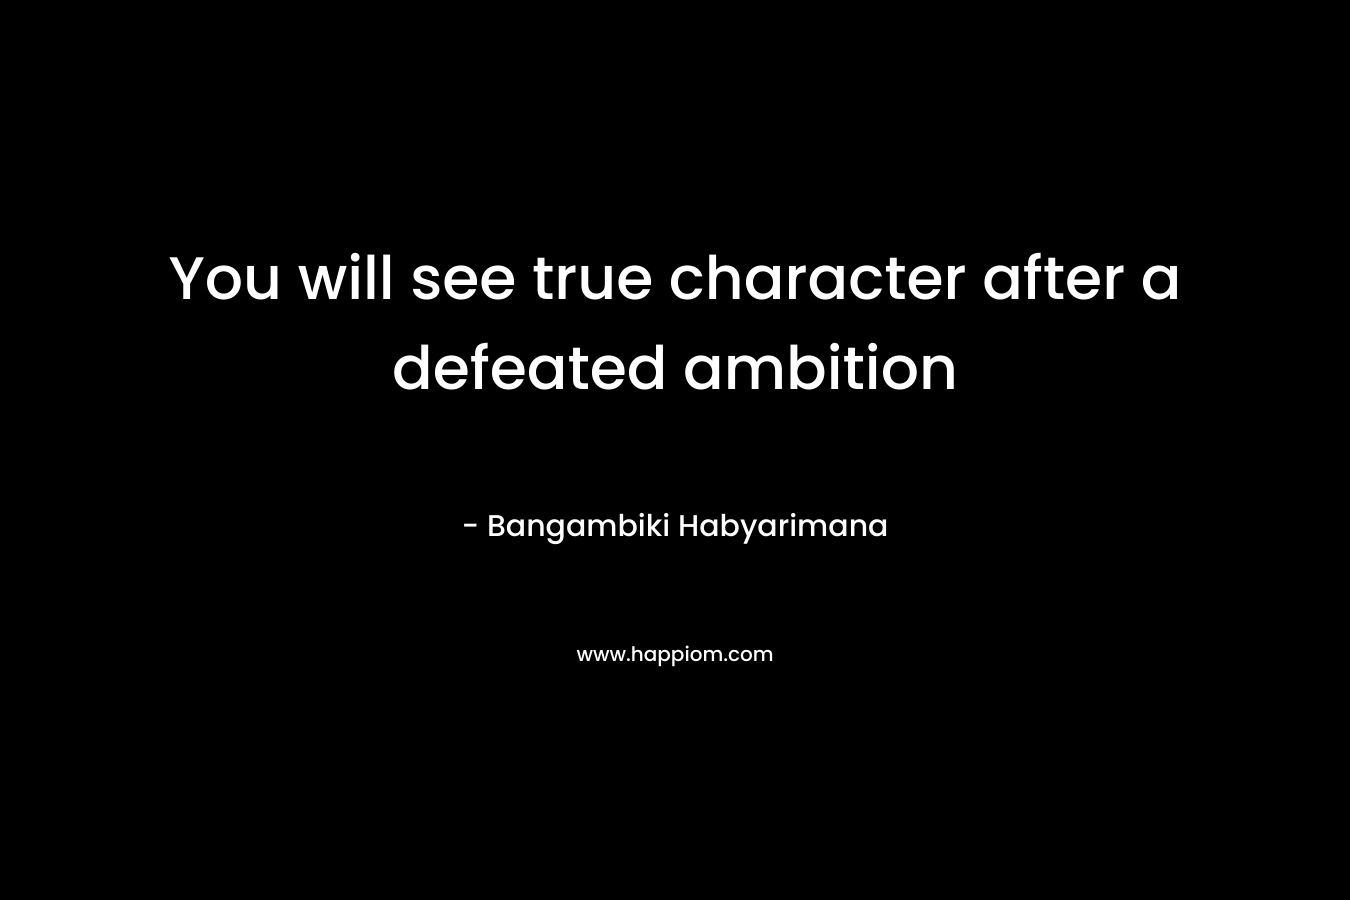 You will see true character after a defeated ambition